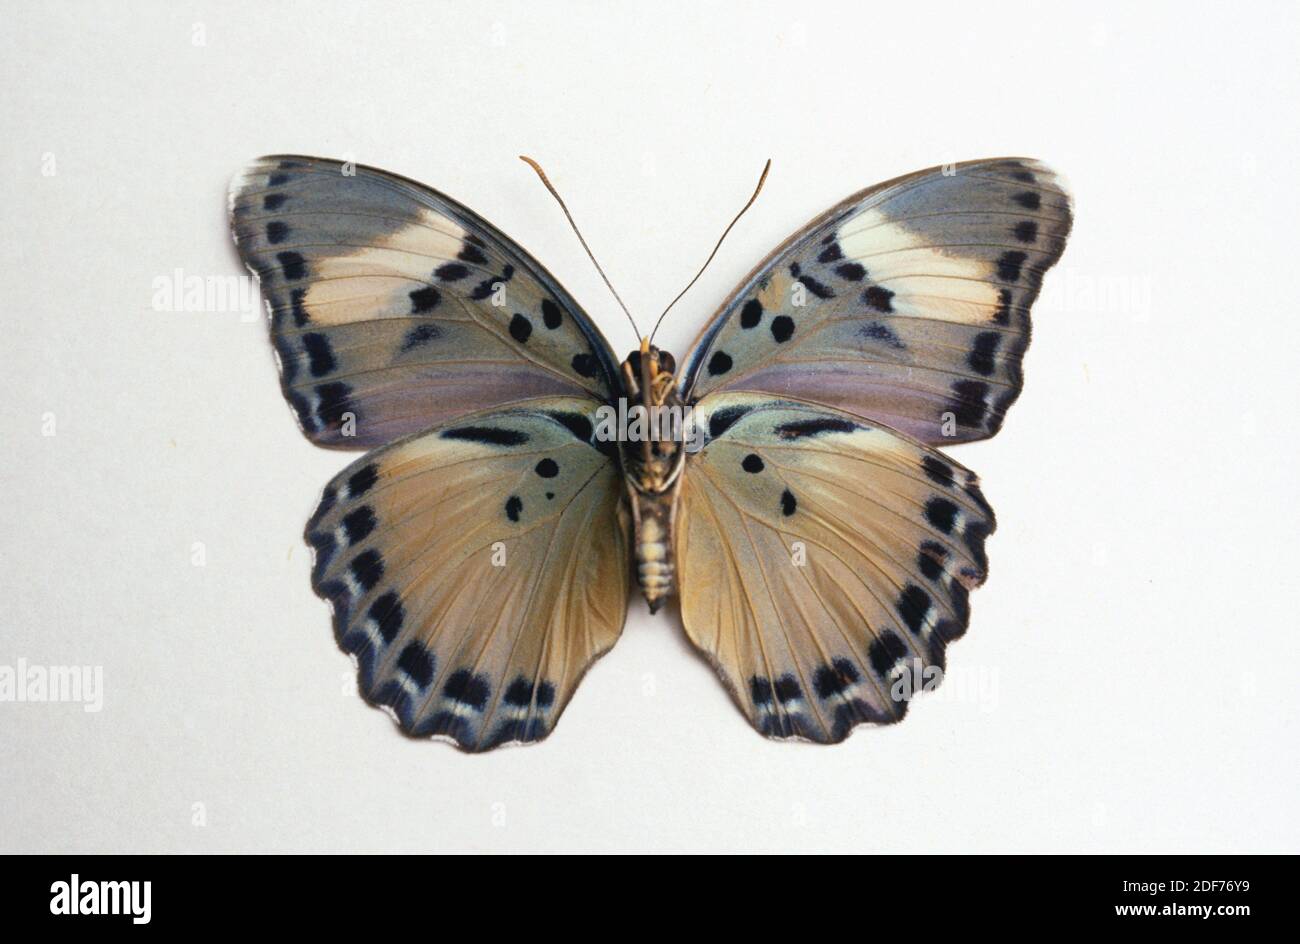 Themis forester (Euphaedra themis) is a butterfly native to central Africa. Ventral surface. Stock Photo